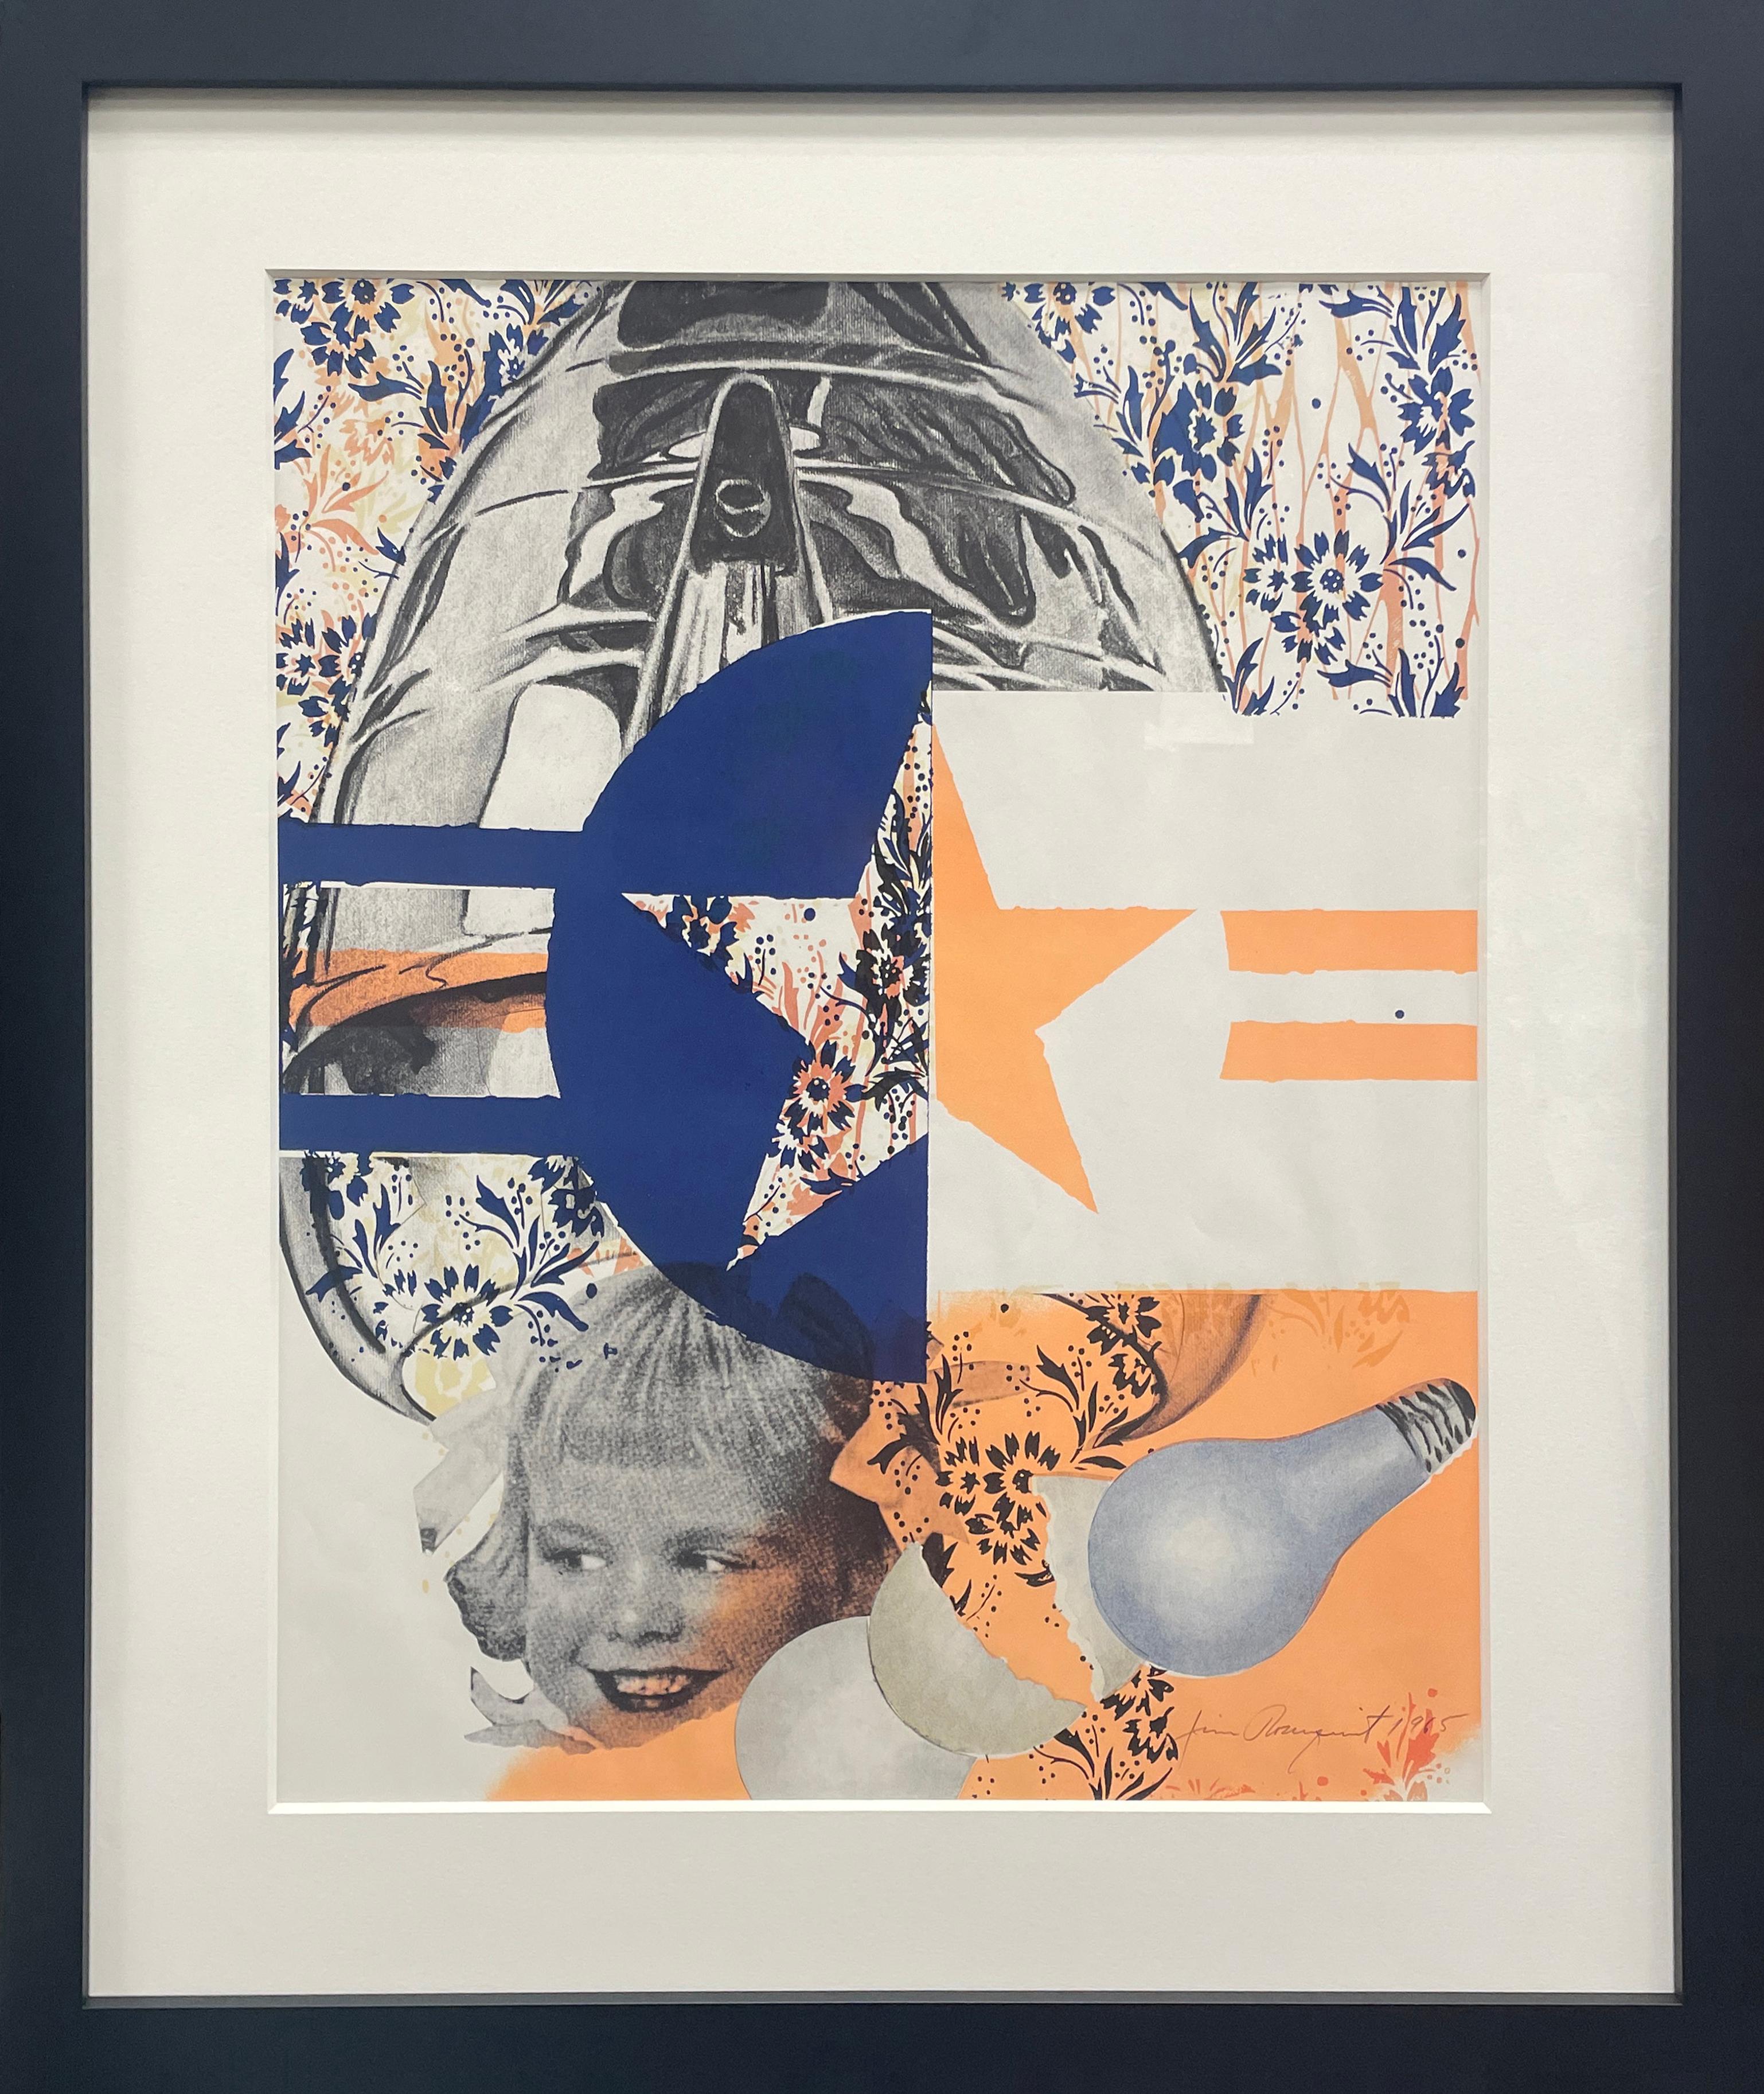 James Rosenquist Abstract Print - F-111 (Castelli Gallery Poster)